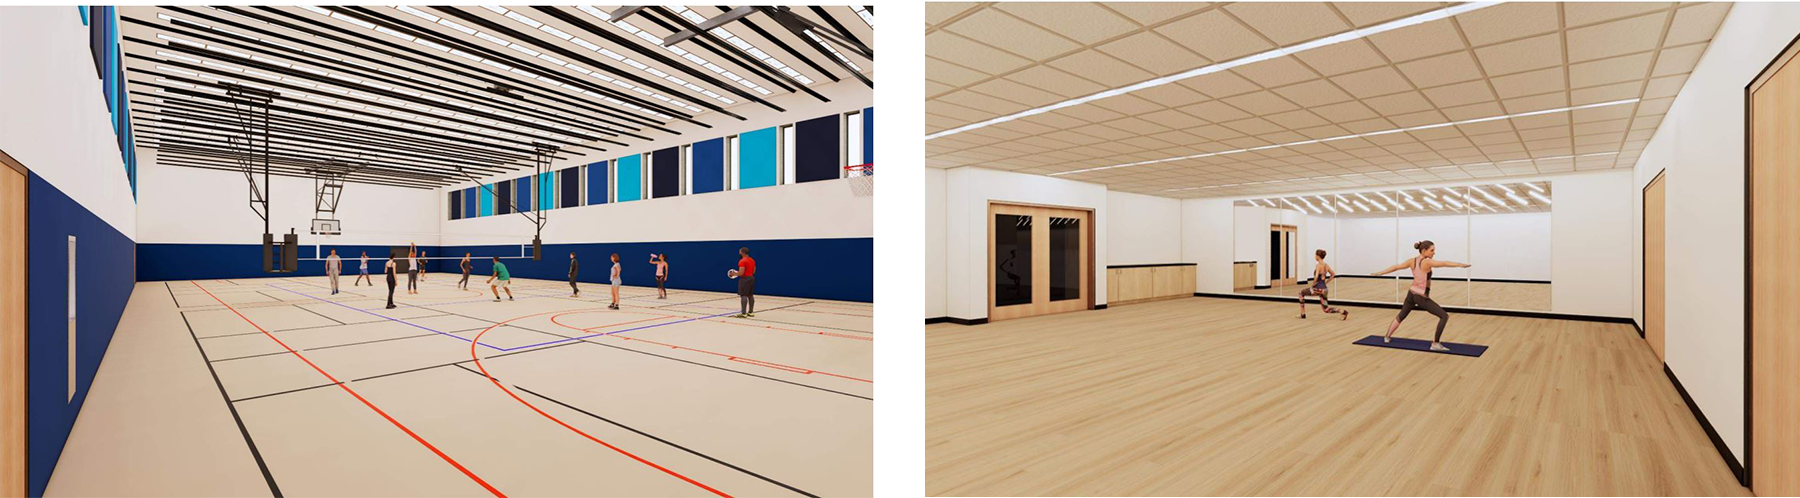 Side-by-side images of the renovated pool as basketball court and a new studio space for yoga.